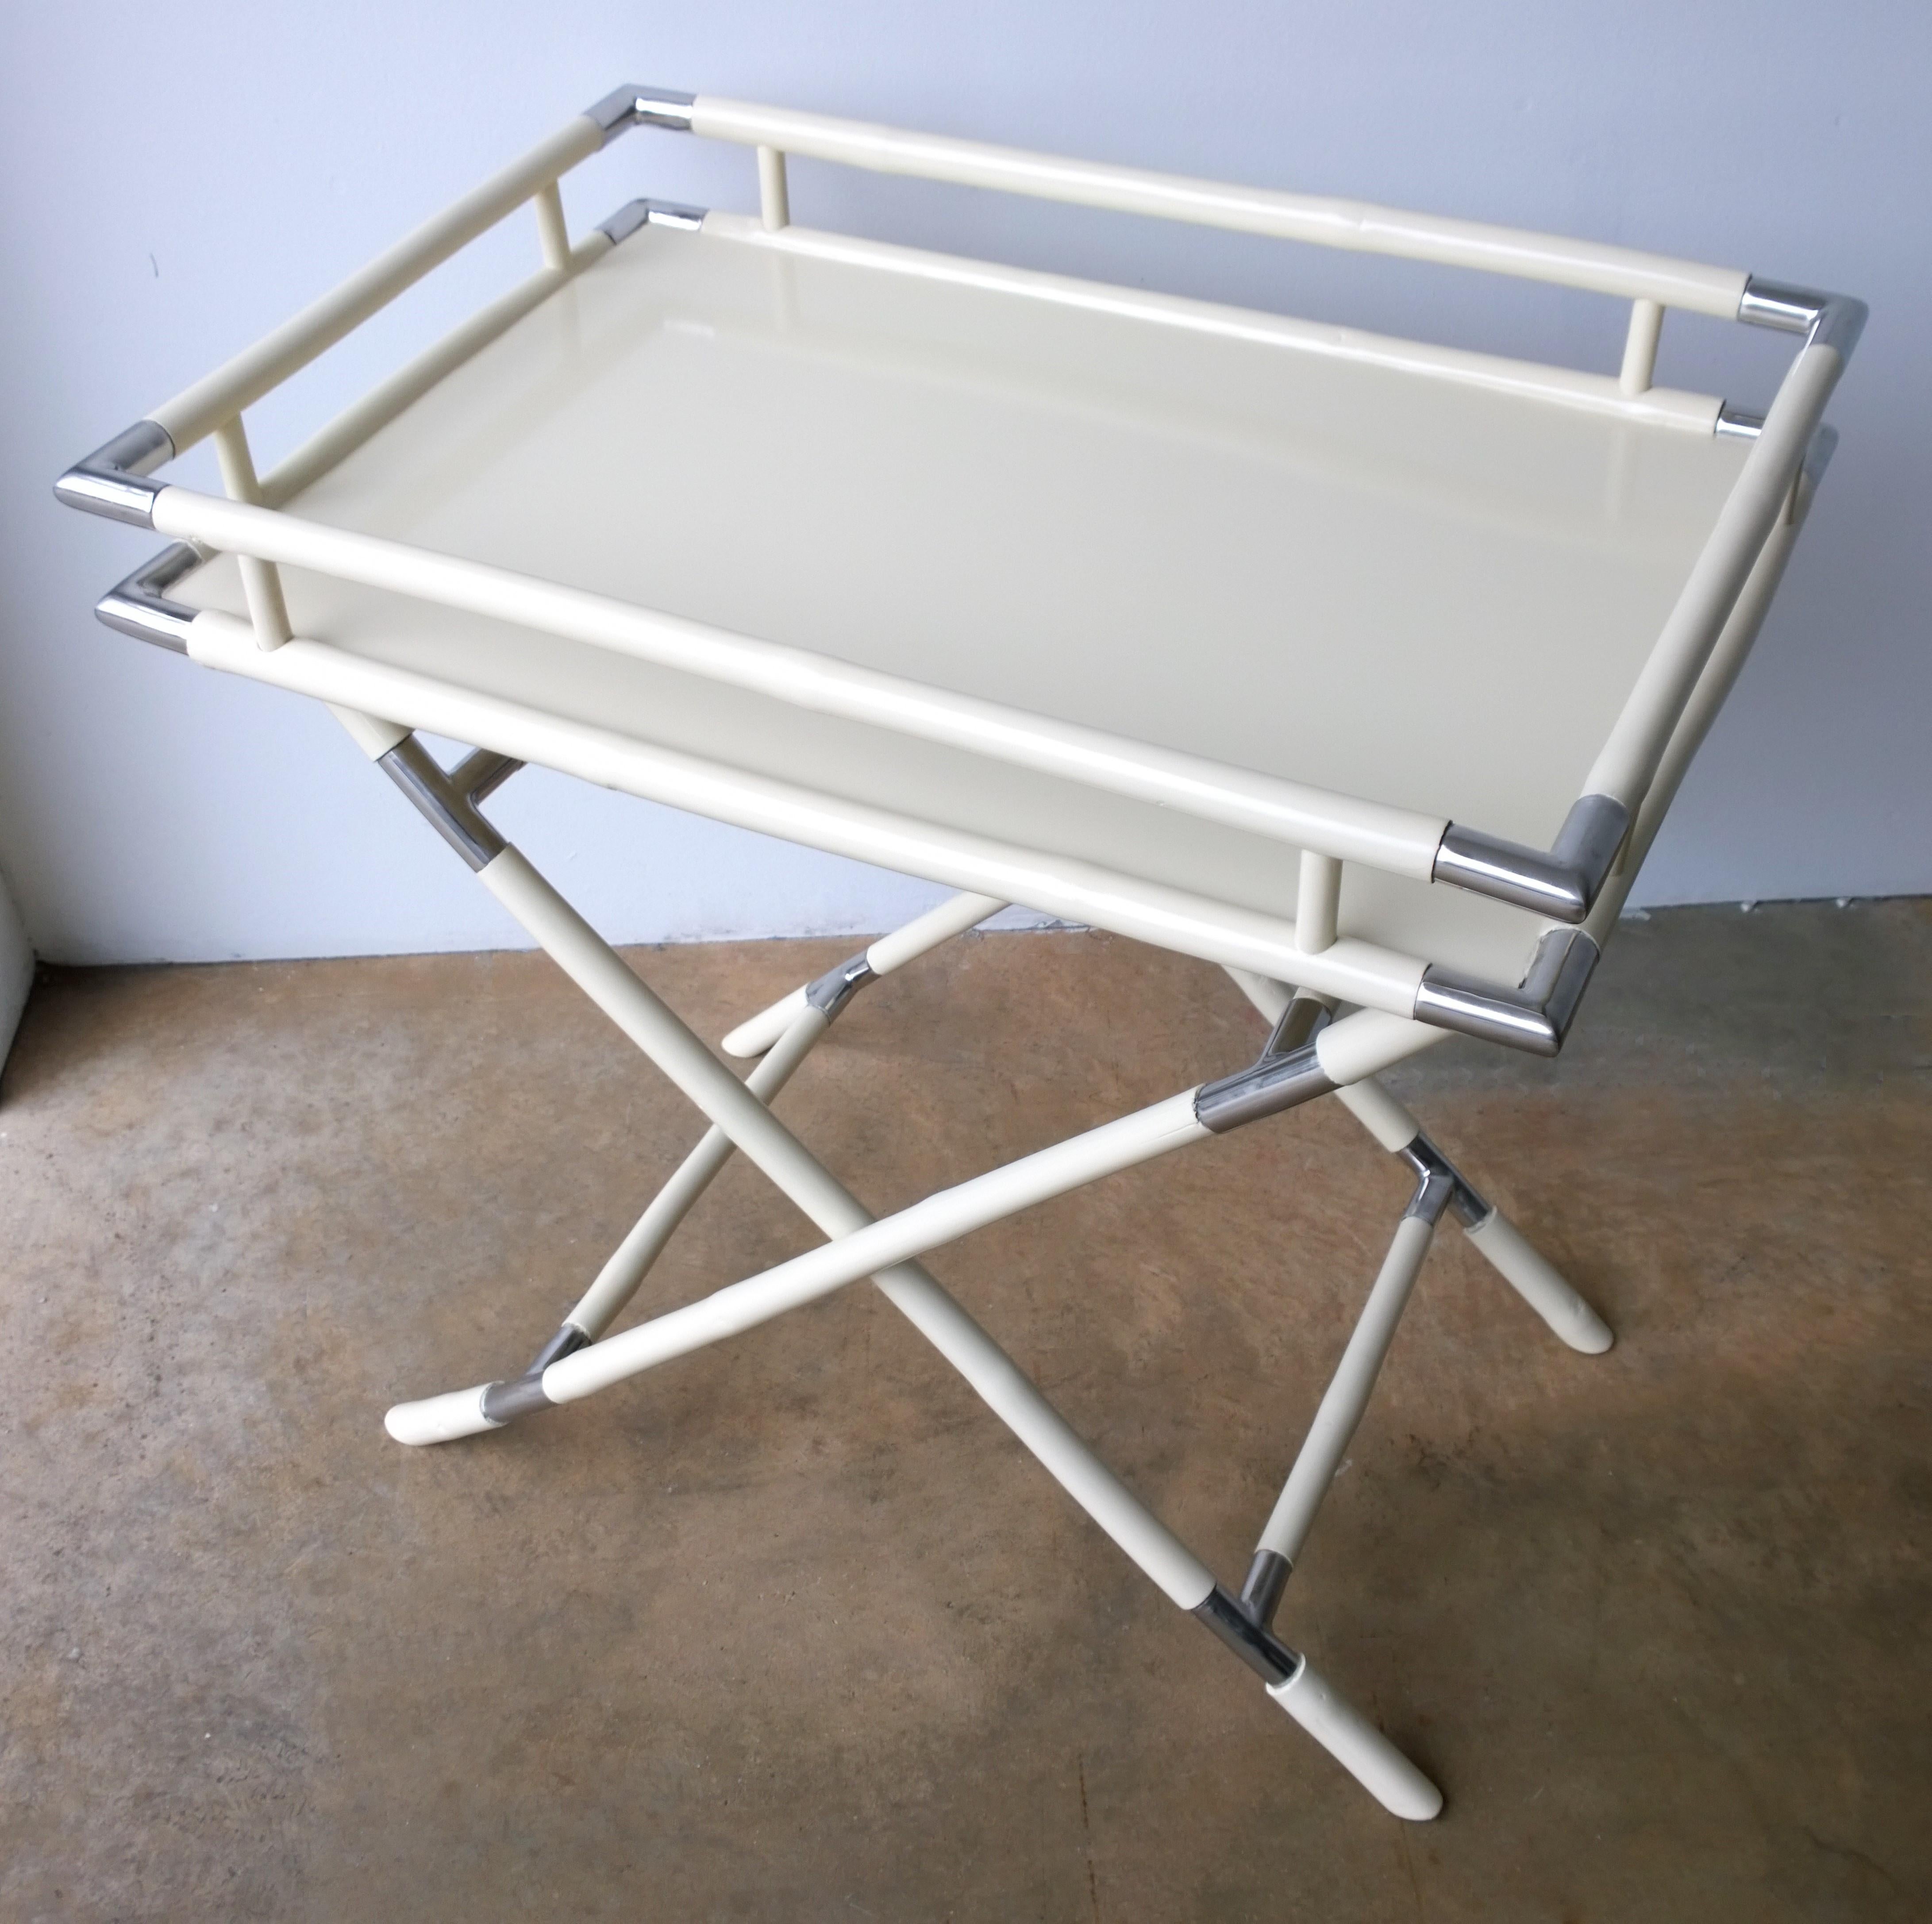 Offered is a Mid-Century Modern Albrizzi style two-piece tray and folding stand newly lacquered in a creamy white / off-white hand carved bamboo wood with chrome accents. The creamy white newly lacquered tray with Classic modern lines and folding